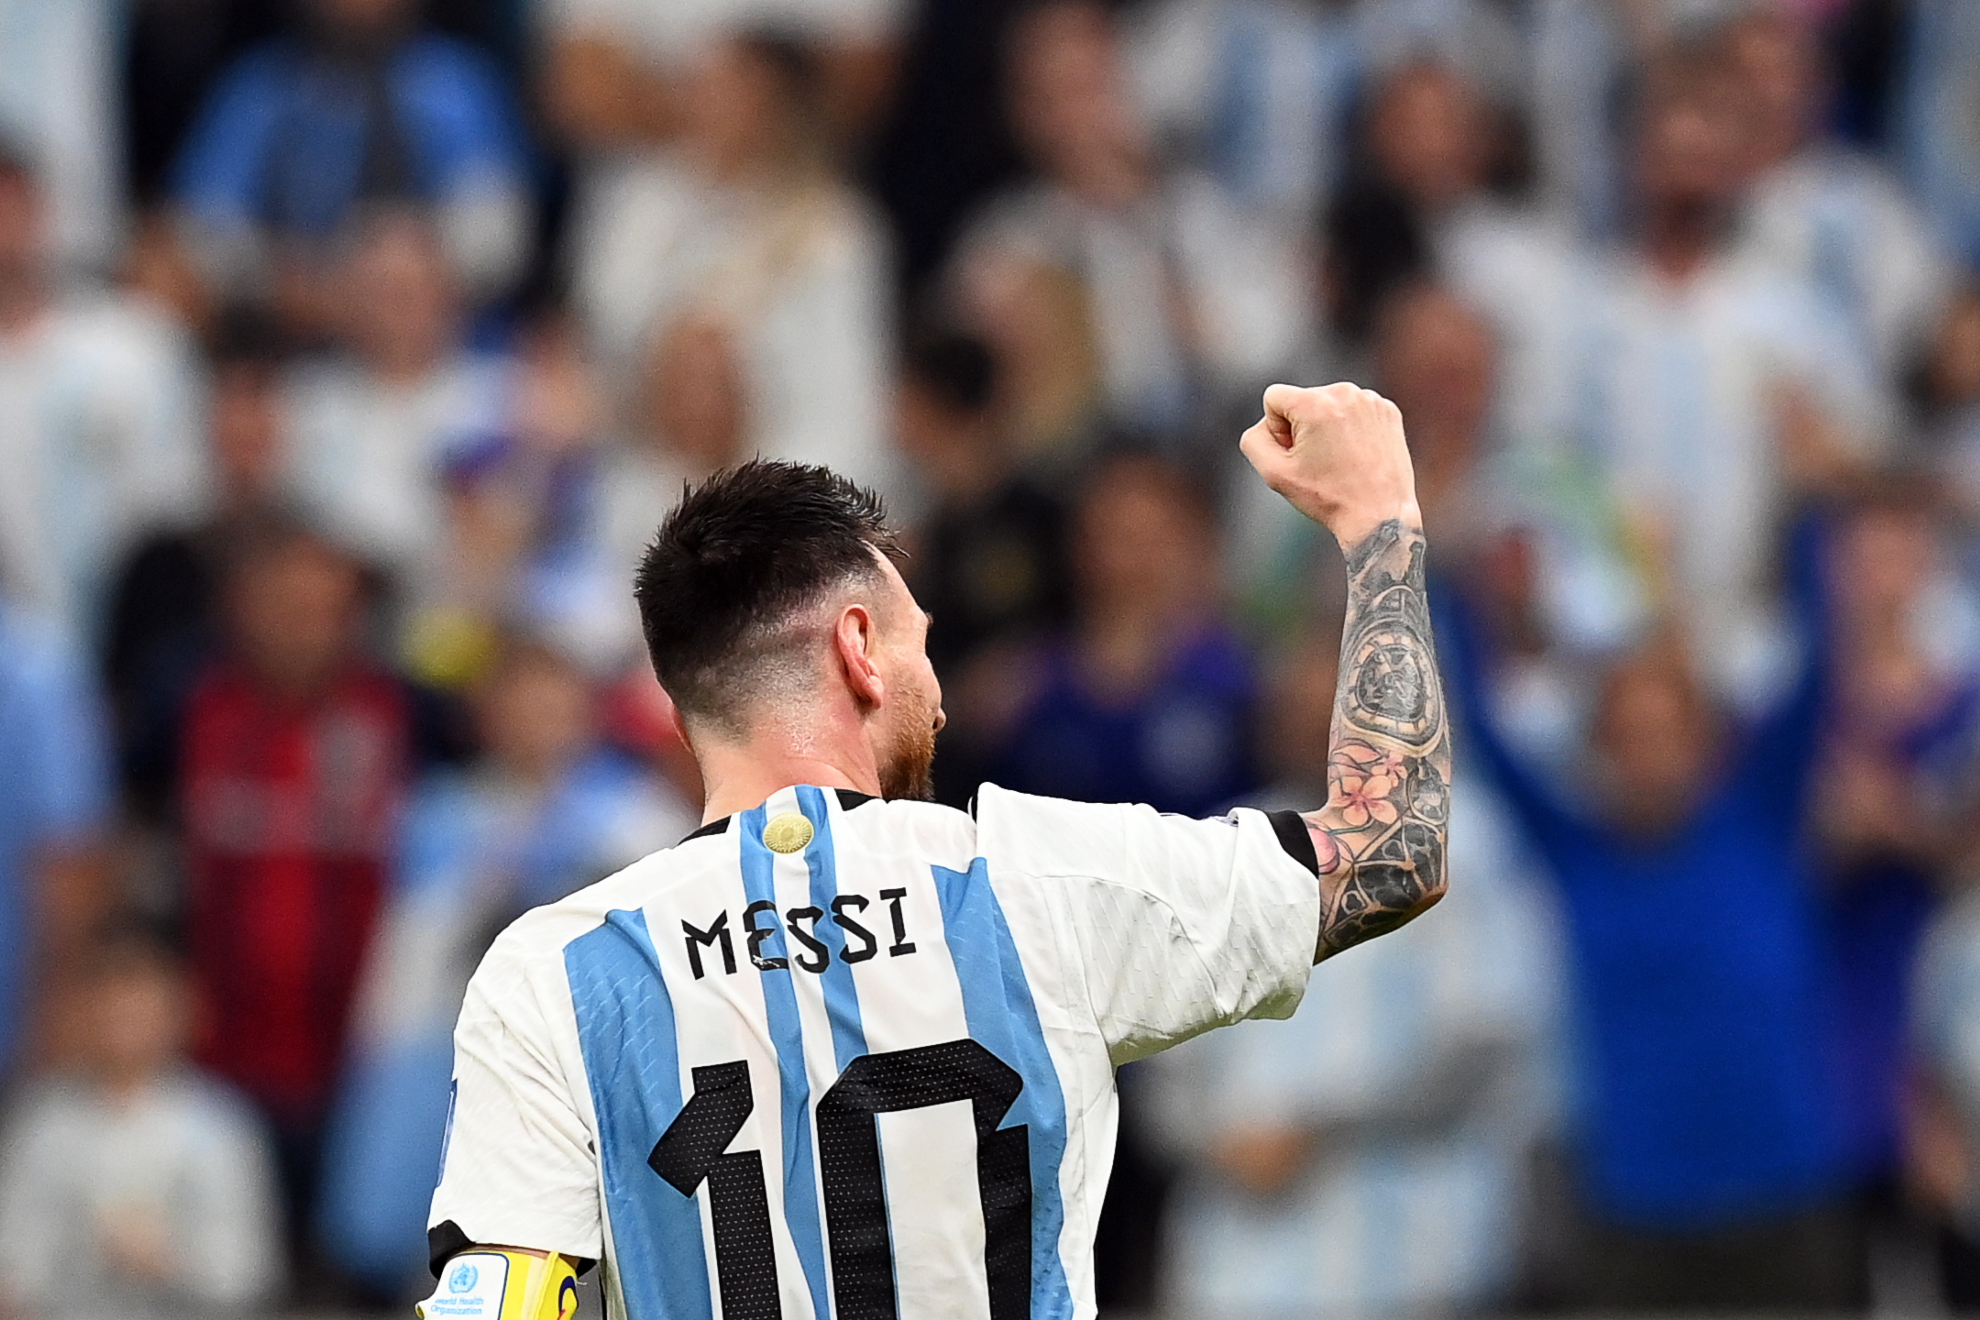 argentina jersey 2022 world cup messi